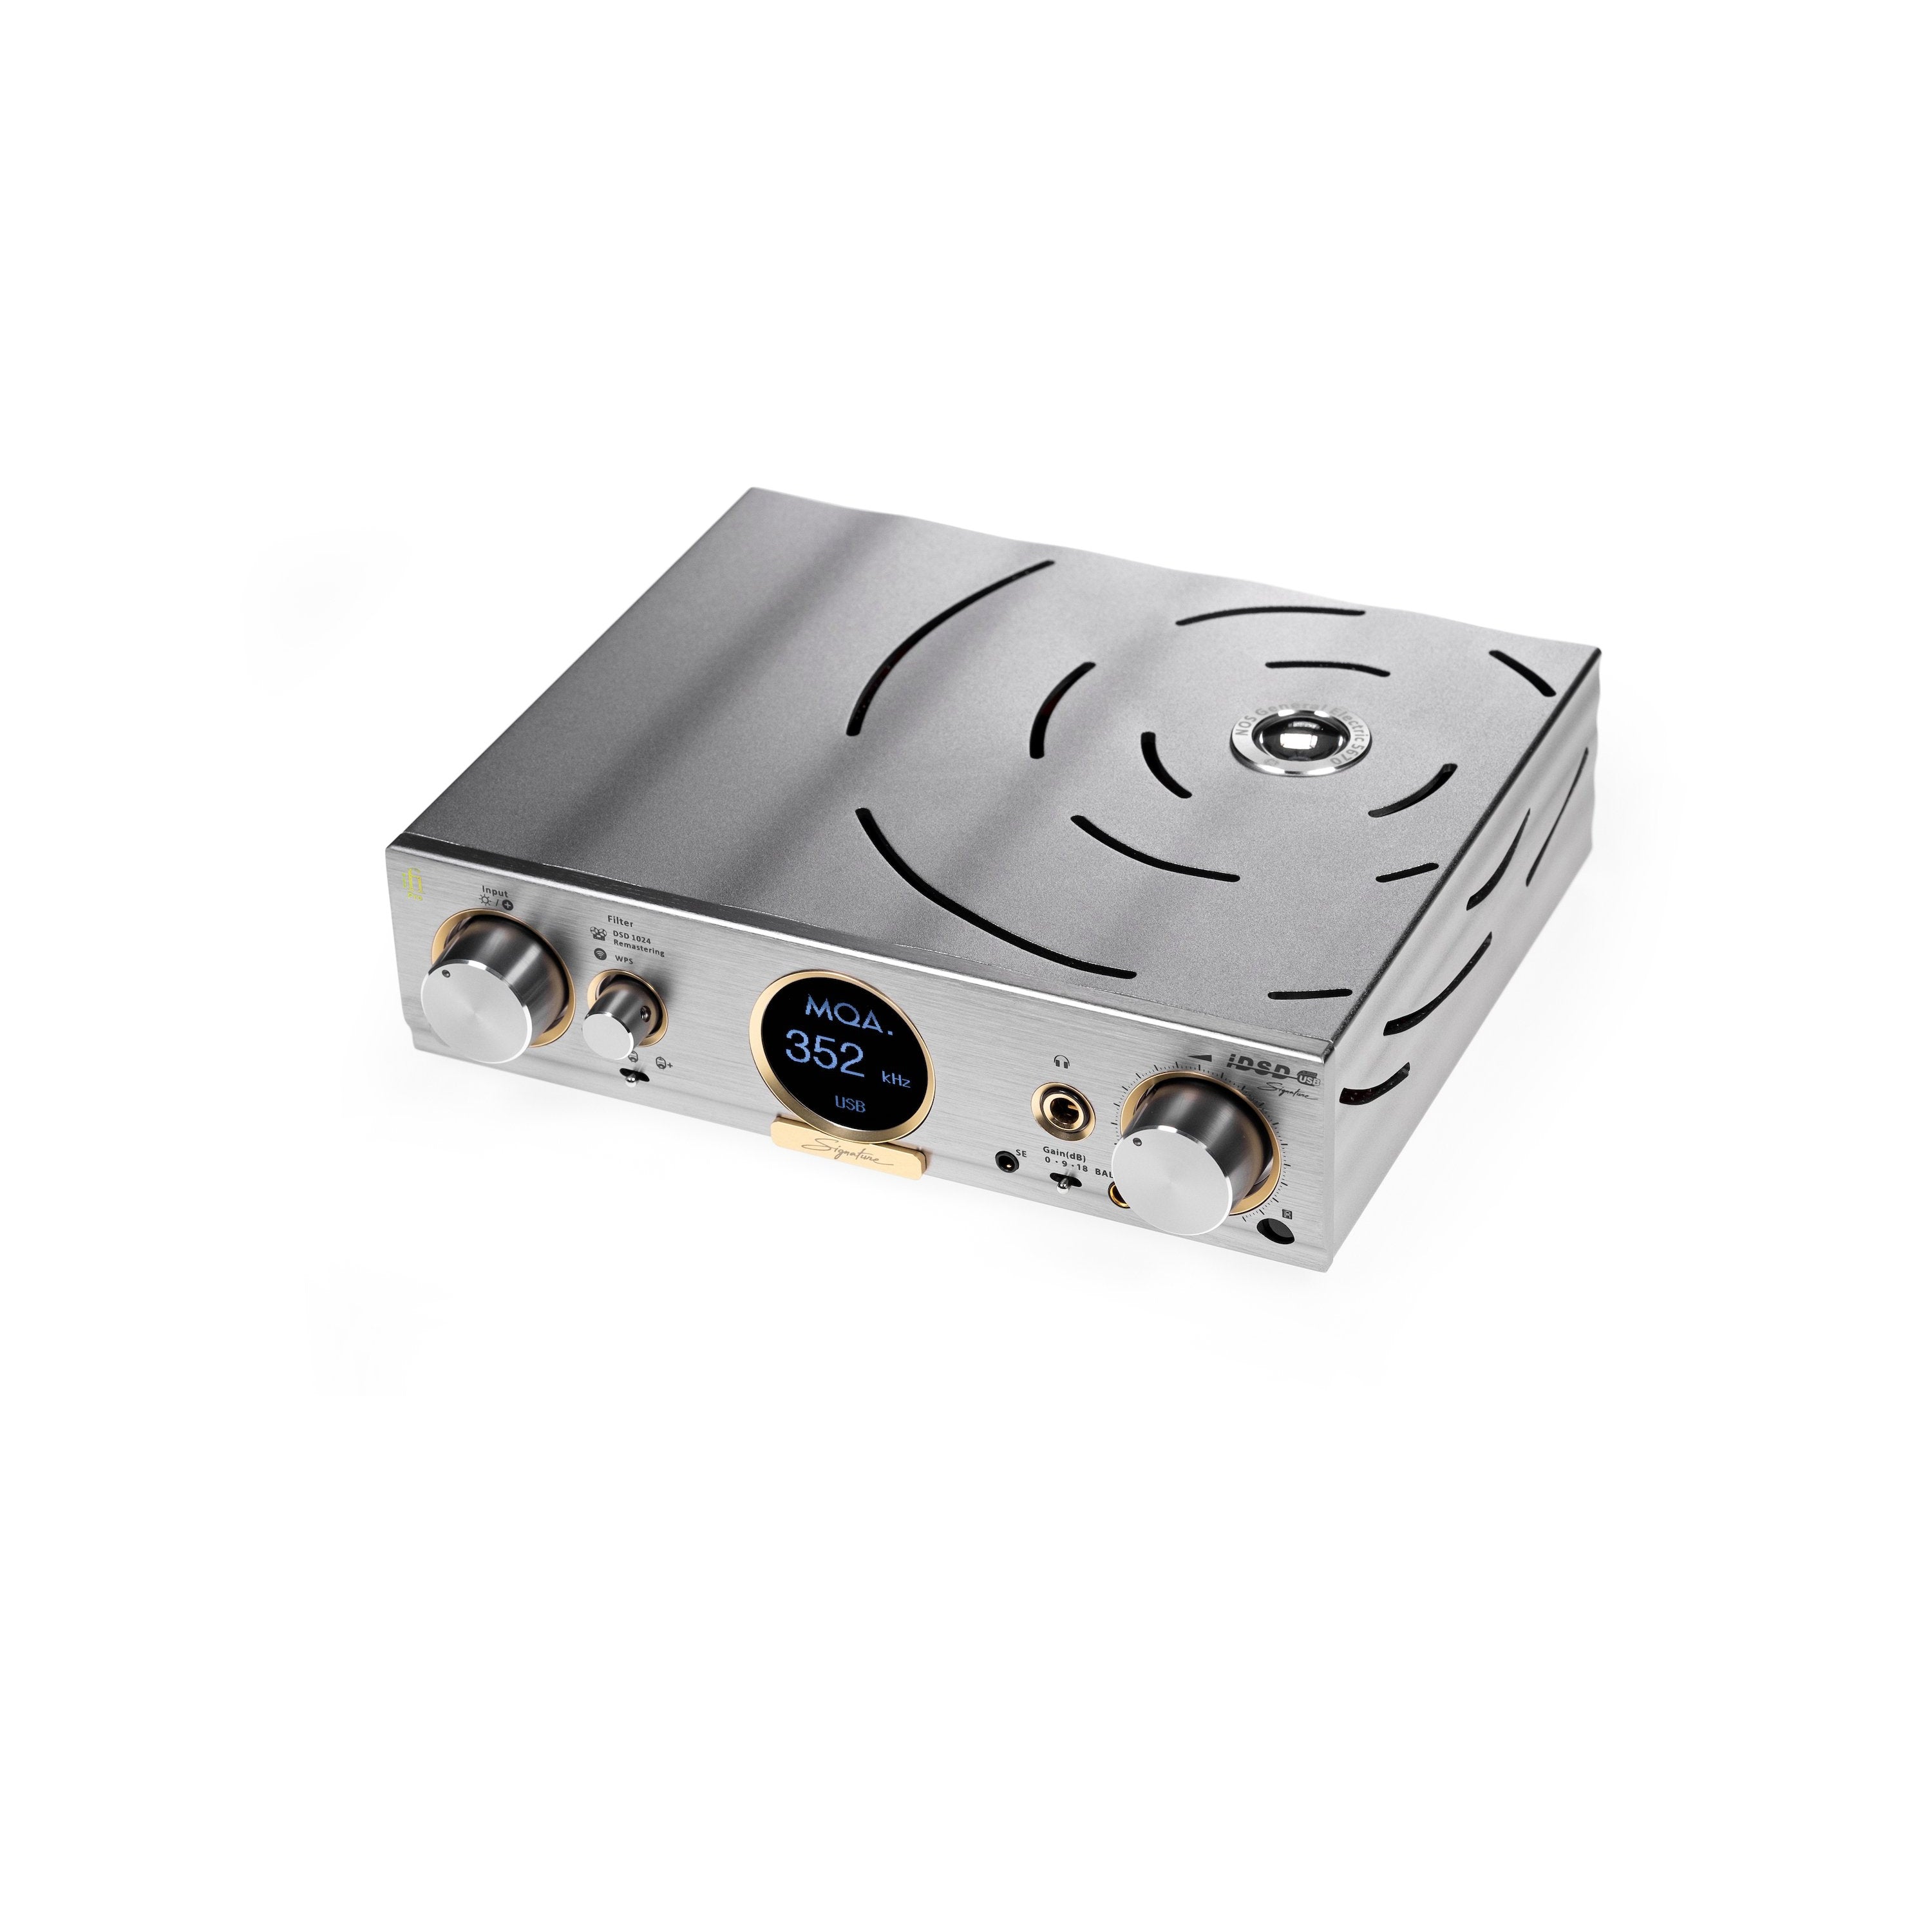 iFi Pro iDSD Signature | DAC, Solid-State & Tube Headphone Amp, and Streamer